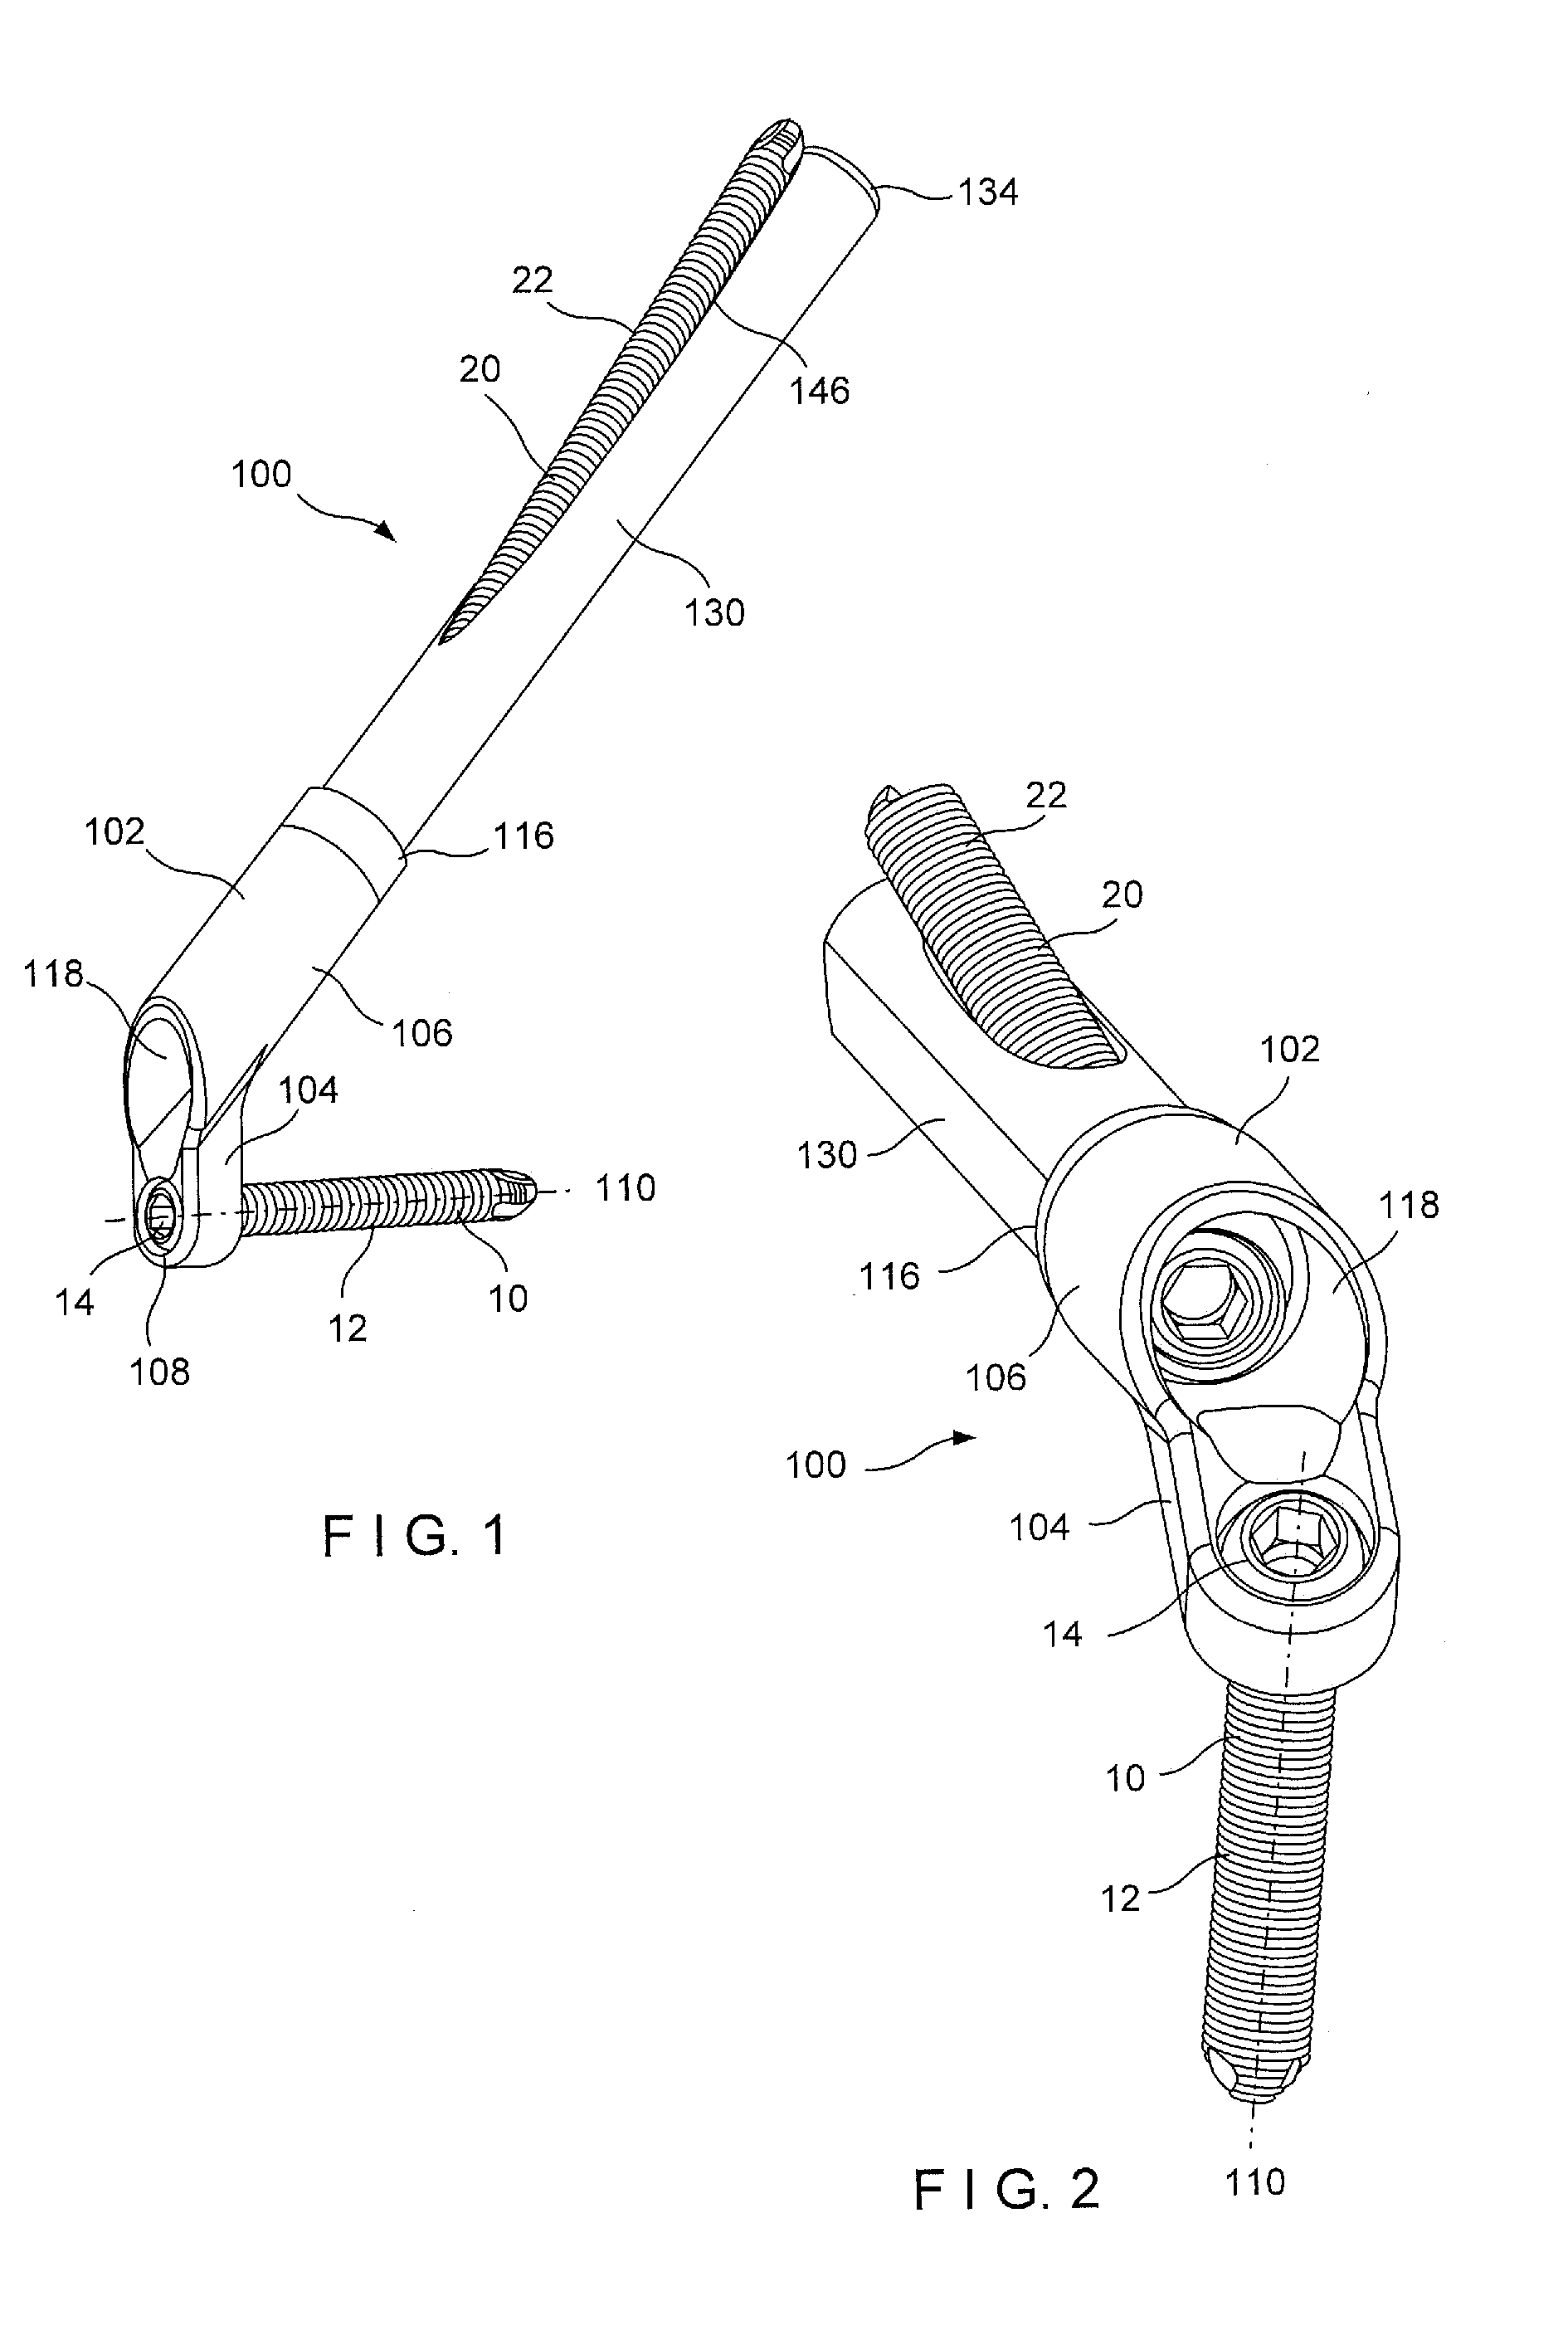 Femoral neck fracture implant